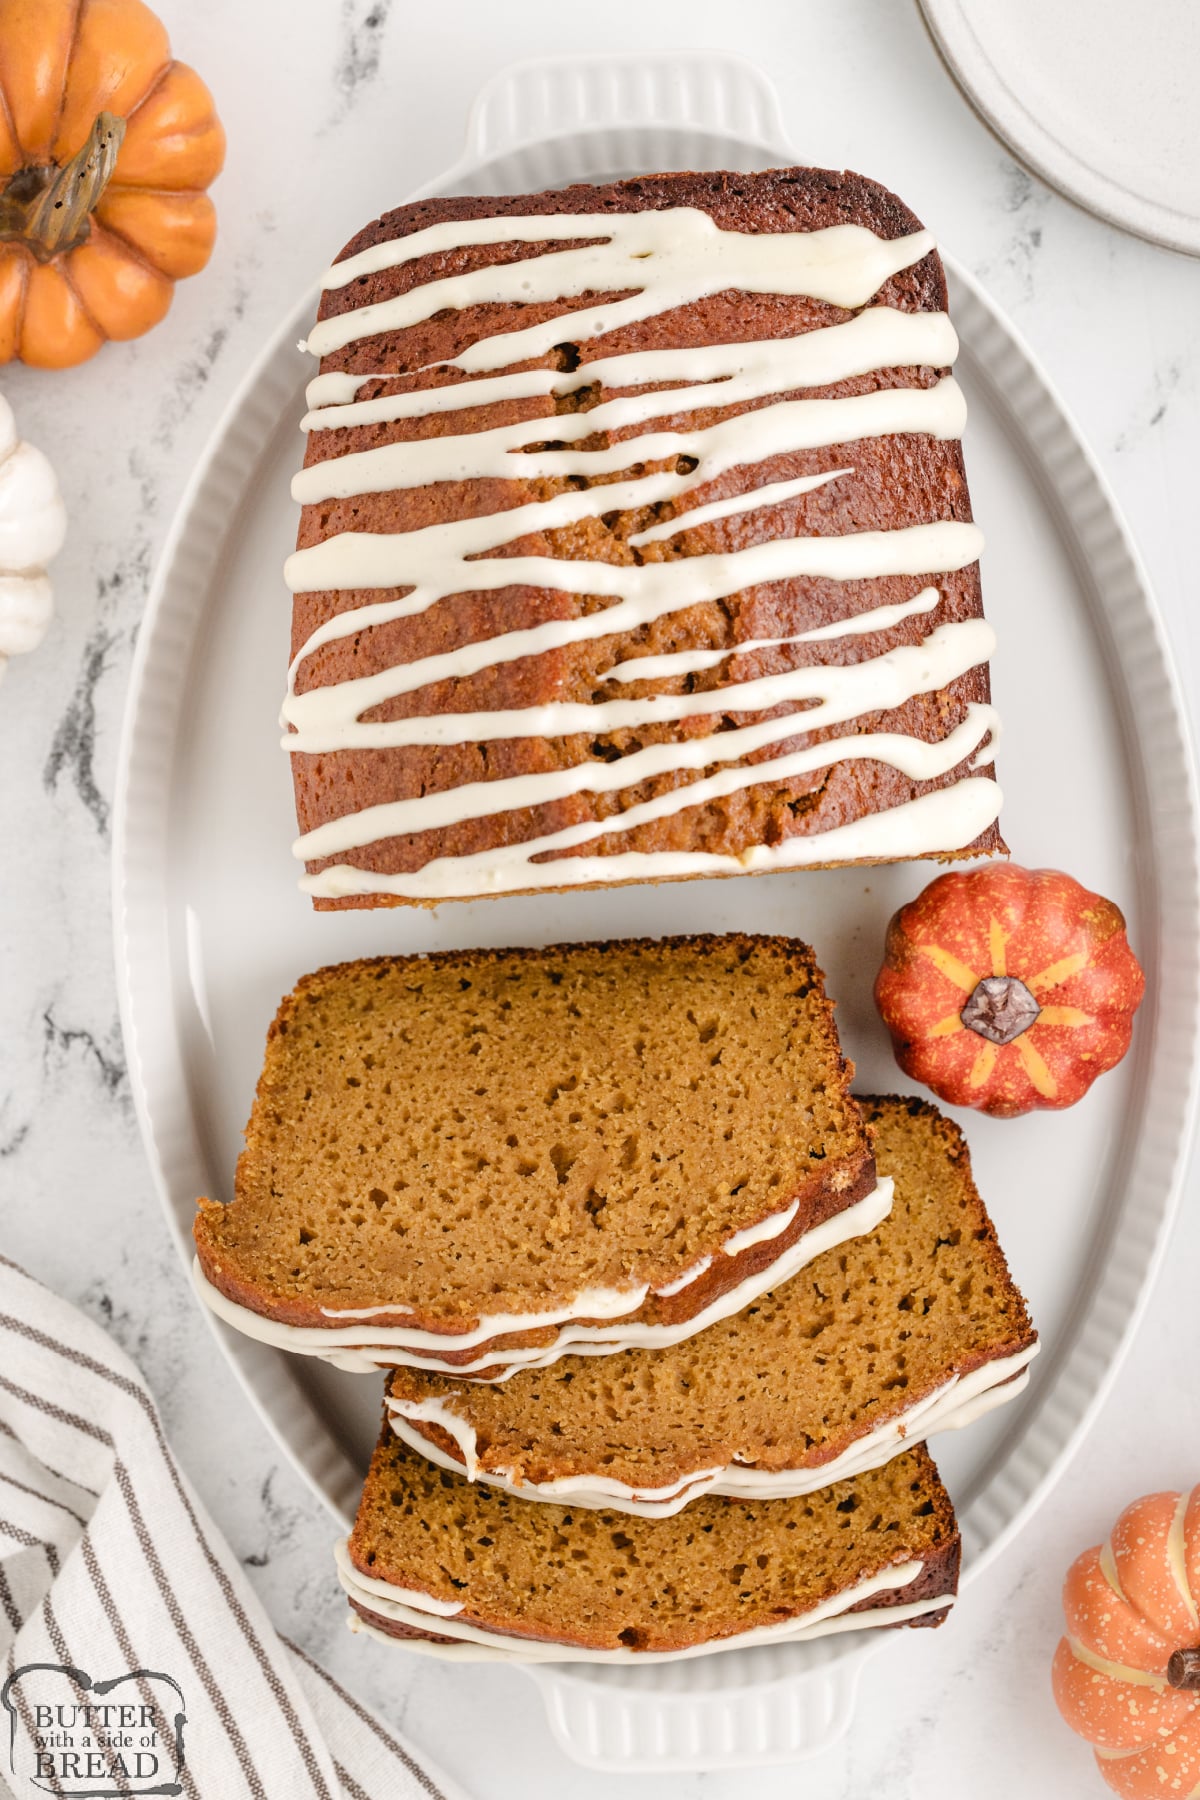 Slices of pumpkin bread with cream cheese frosting.